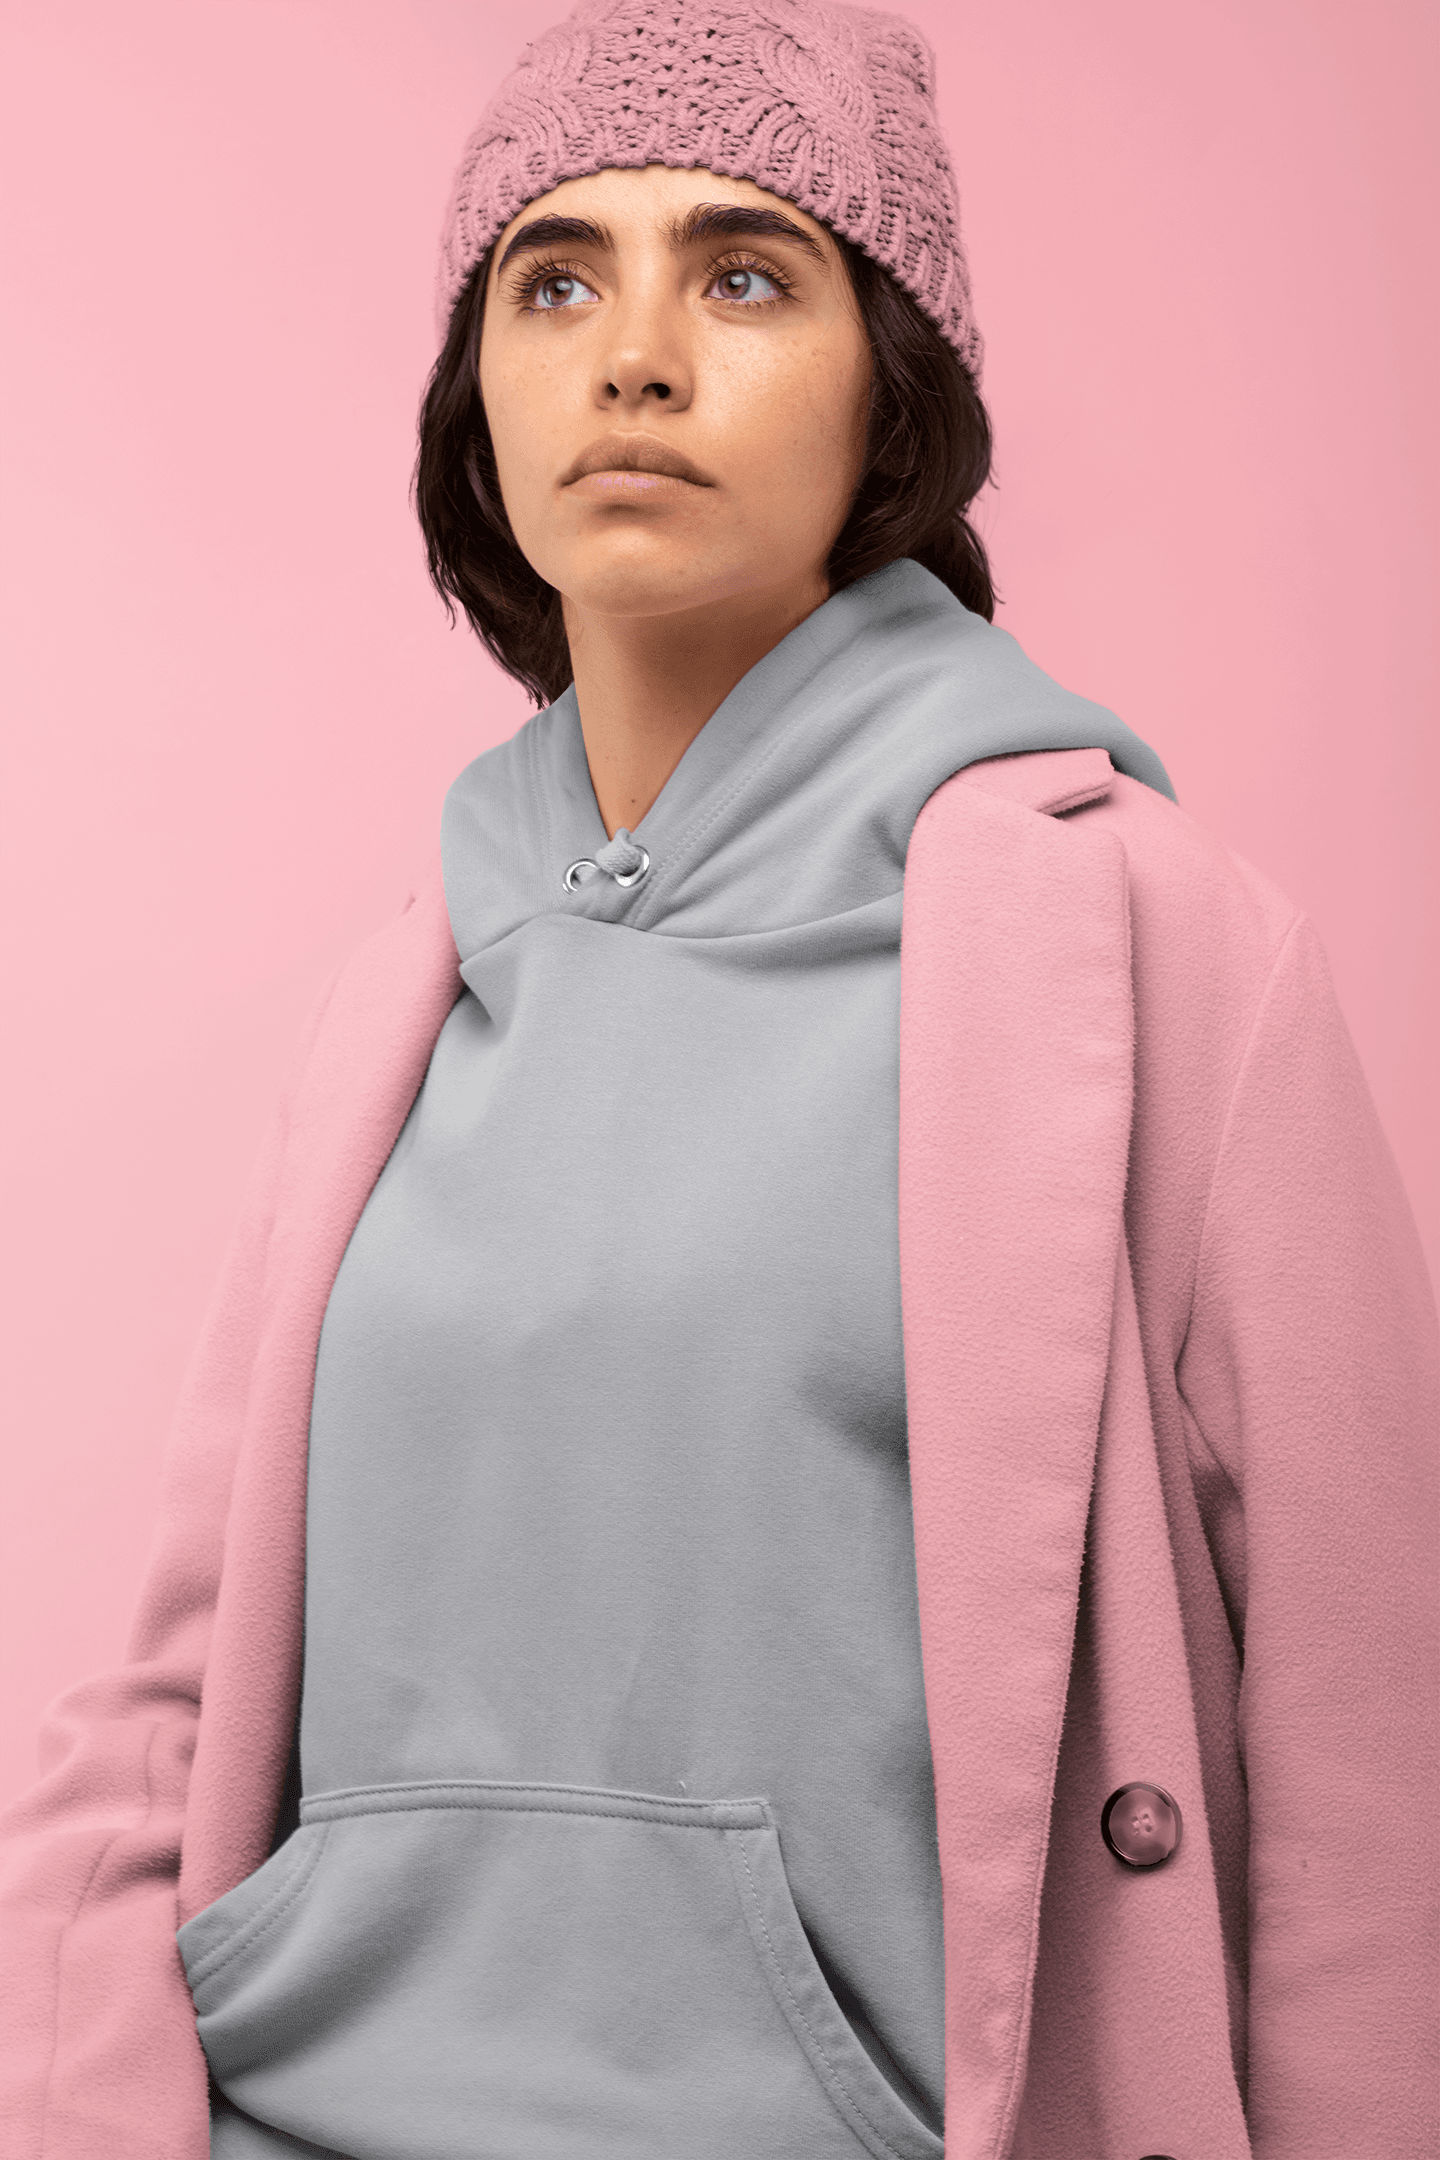 No Fuss Hooded Sweatshirt - The Accessorys Official